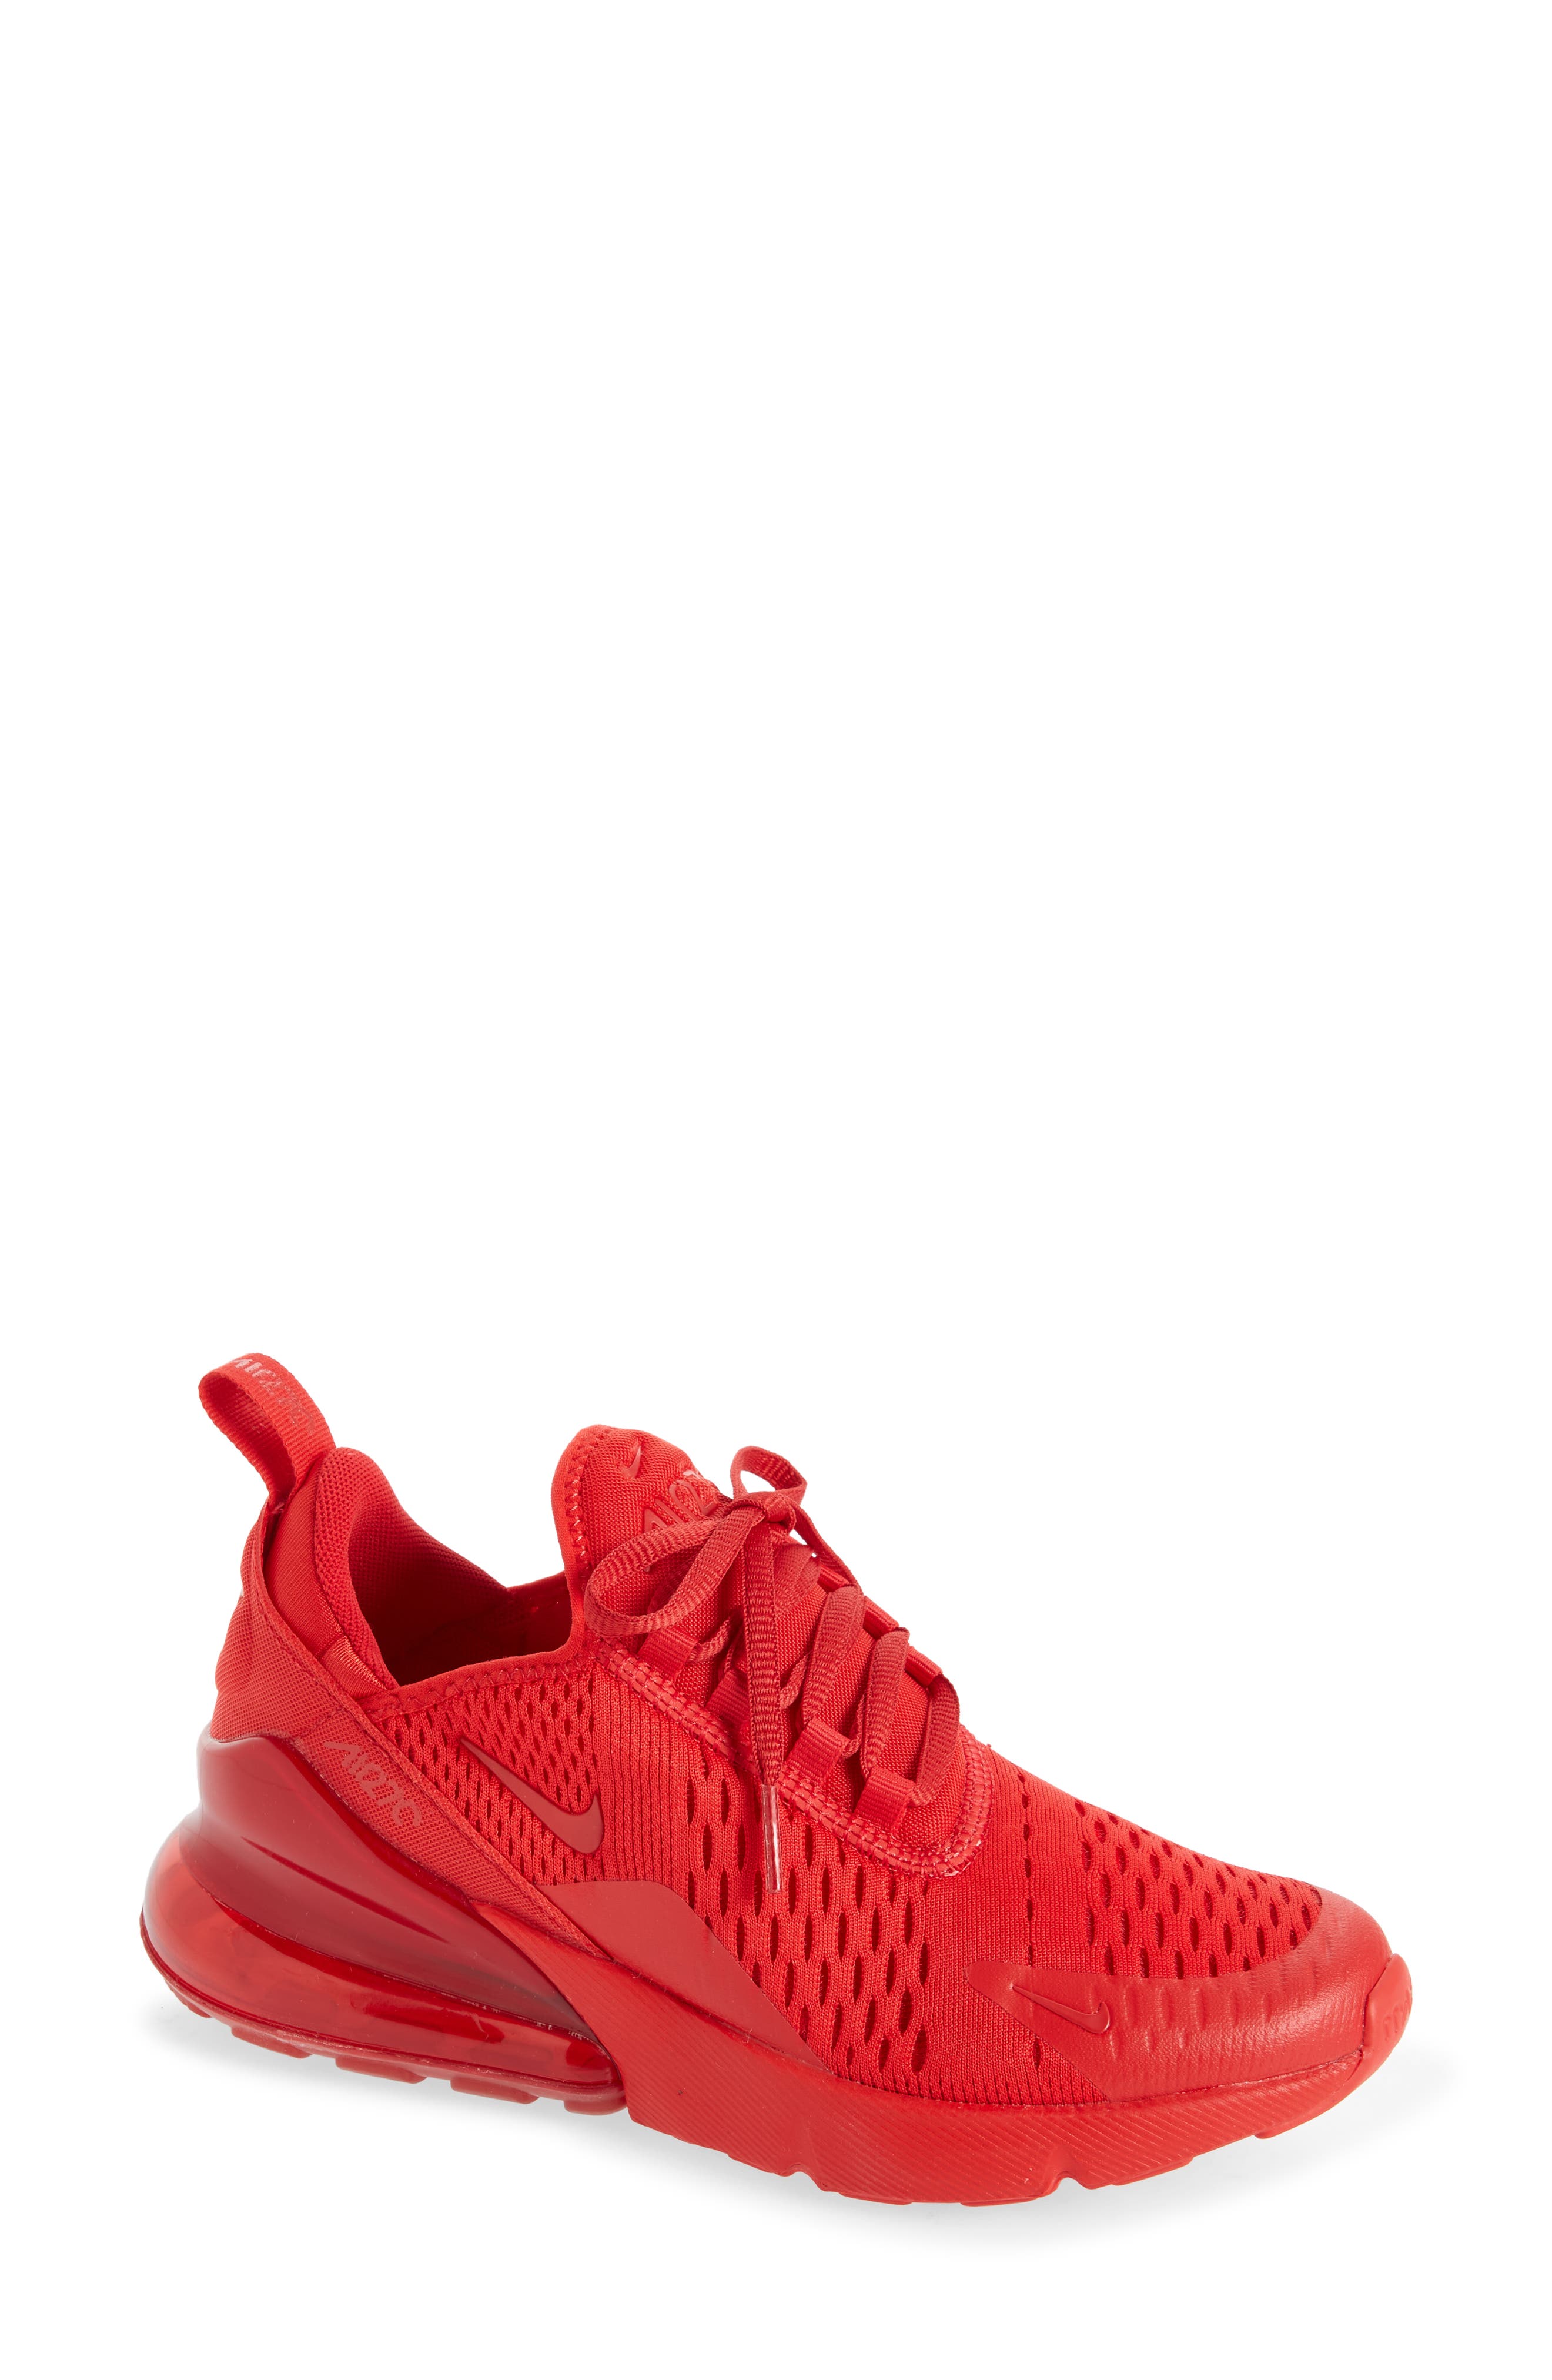 nike with red